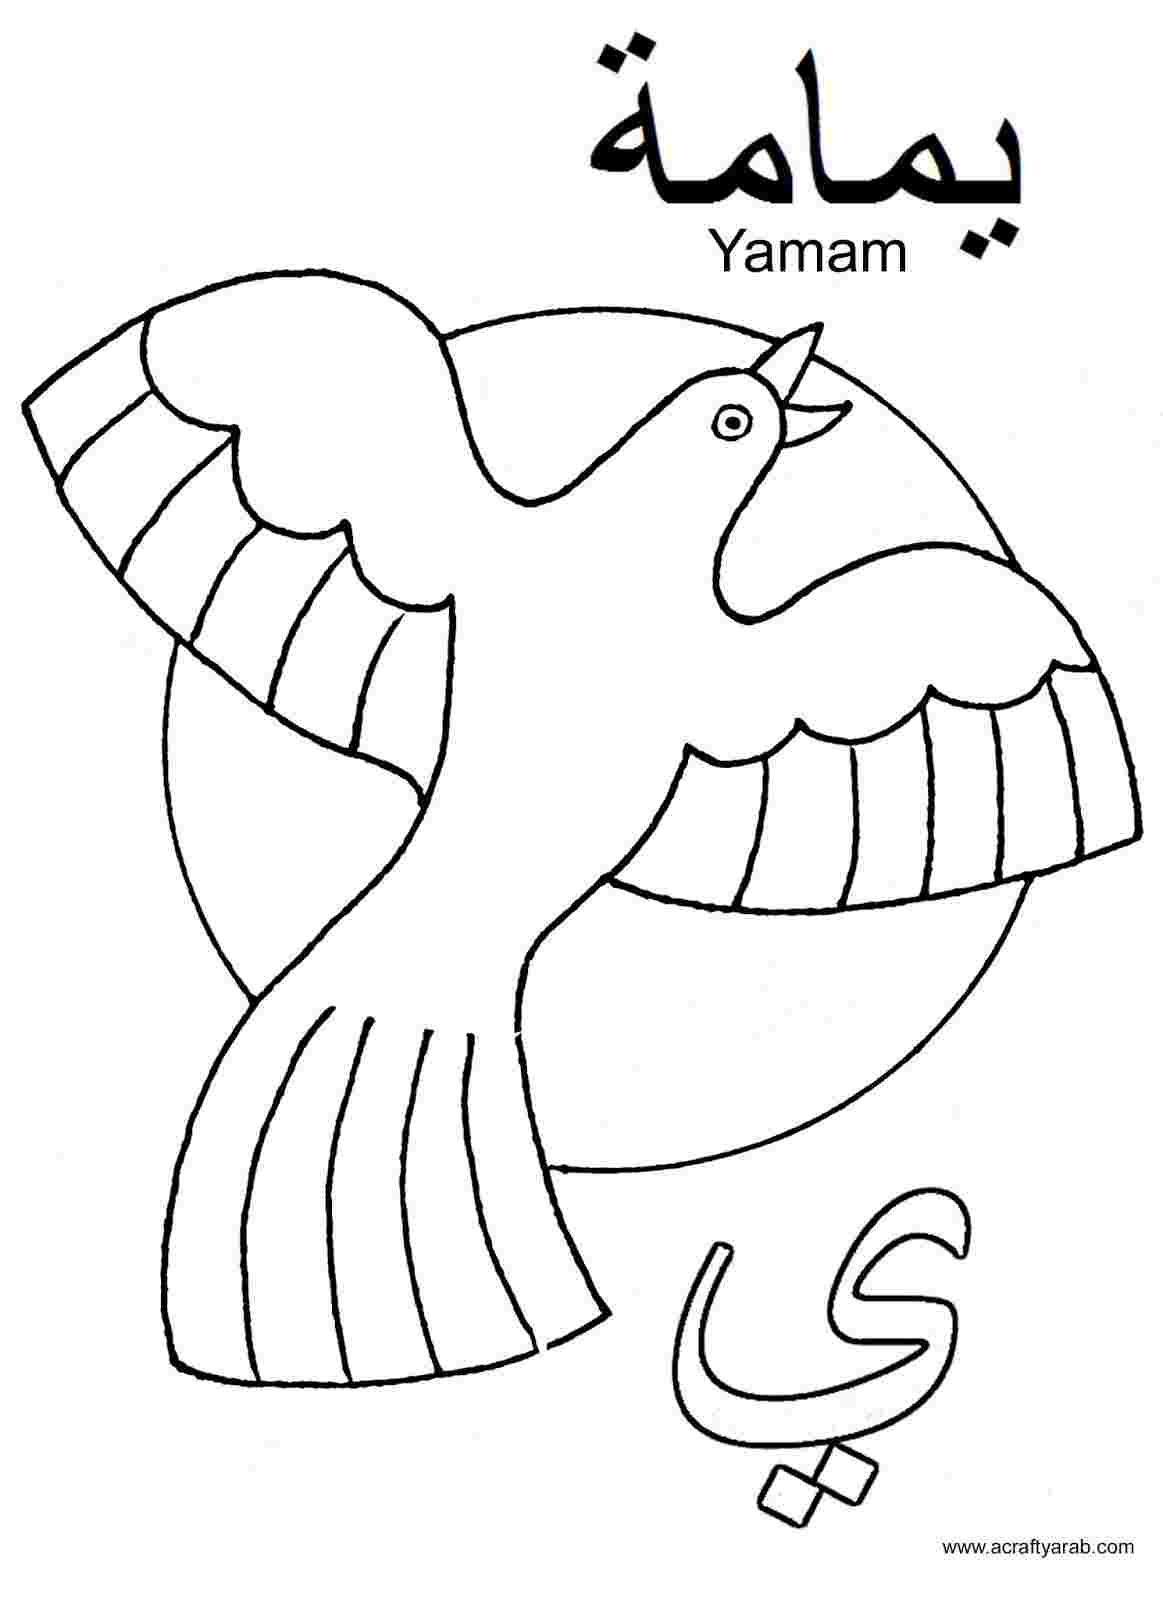 Coloring : Awesome Islamicts Picture Ideas Pages For Arabic Alphabet  Pagesya Is Yamam 52 Islamic Sheets Kids Printable Free Disney ~  Americangrassrootscoalition